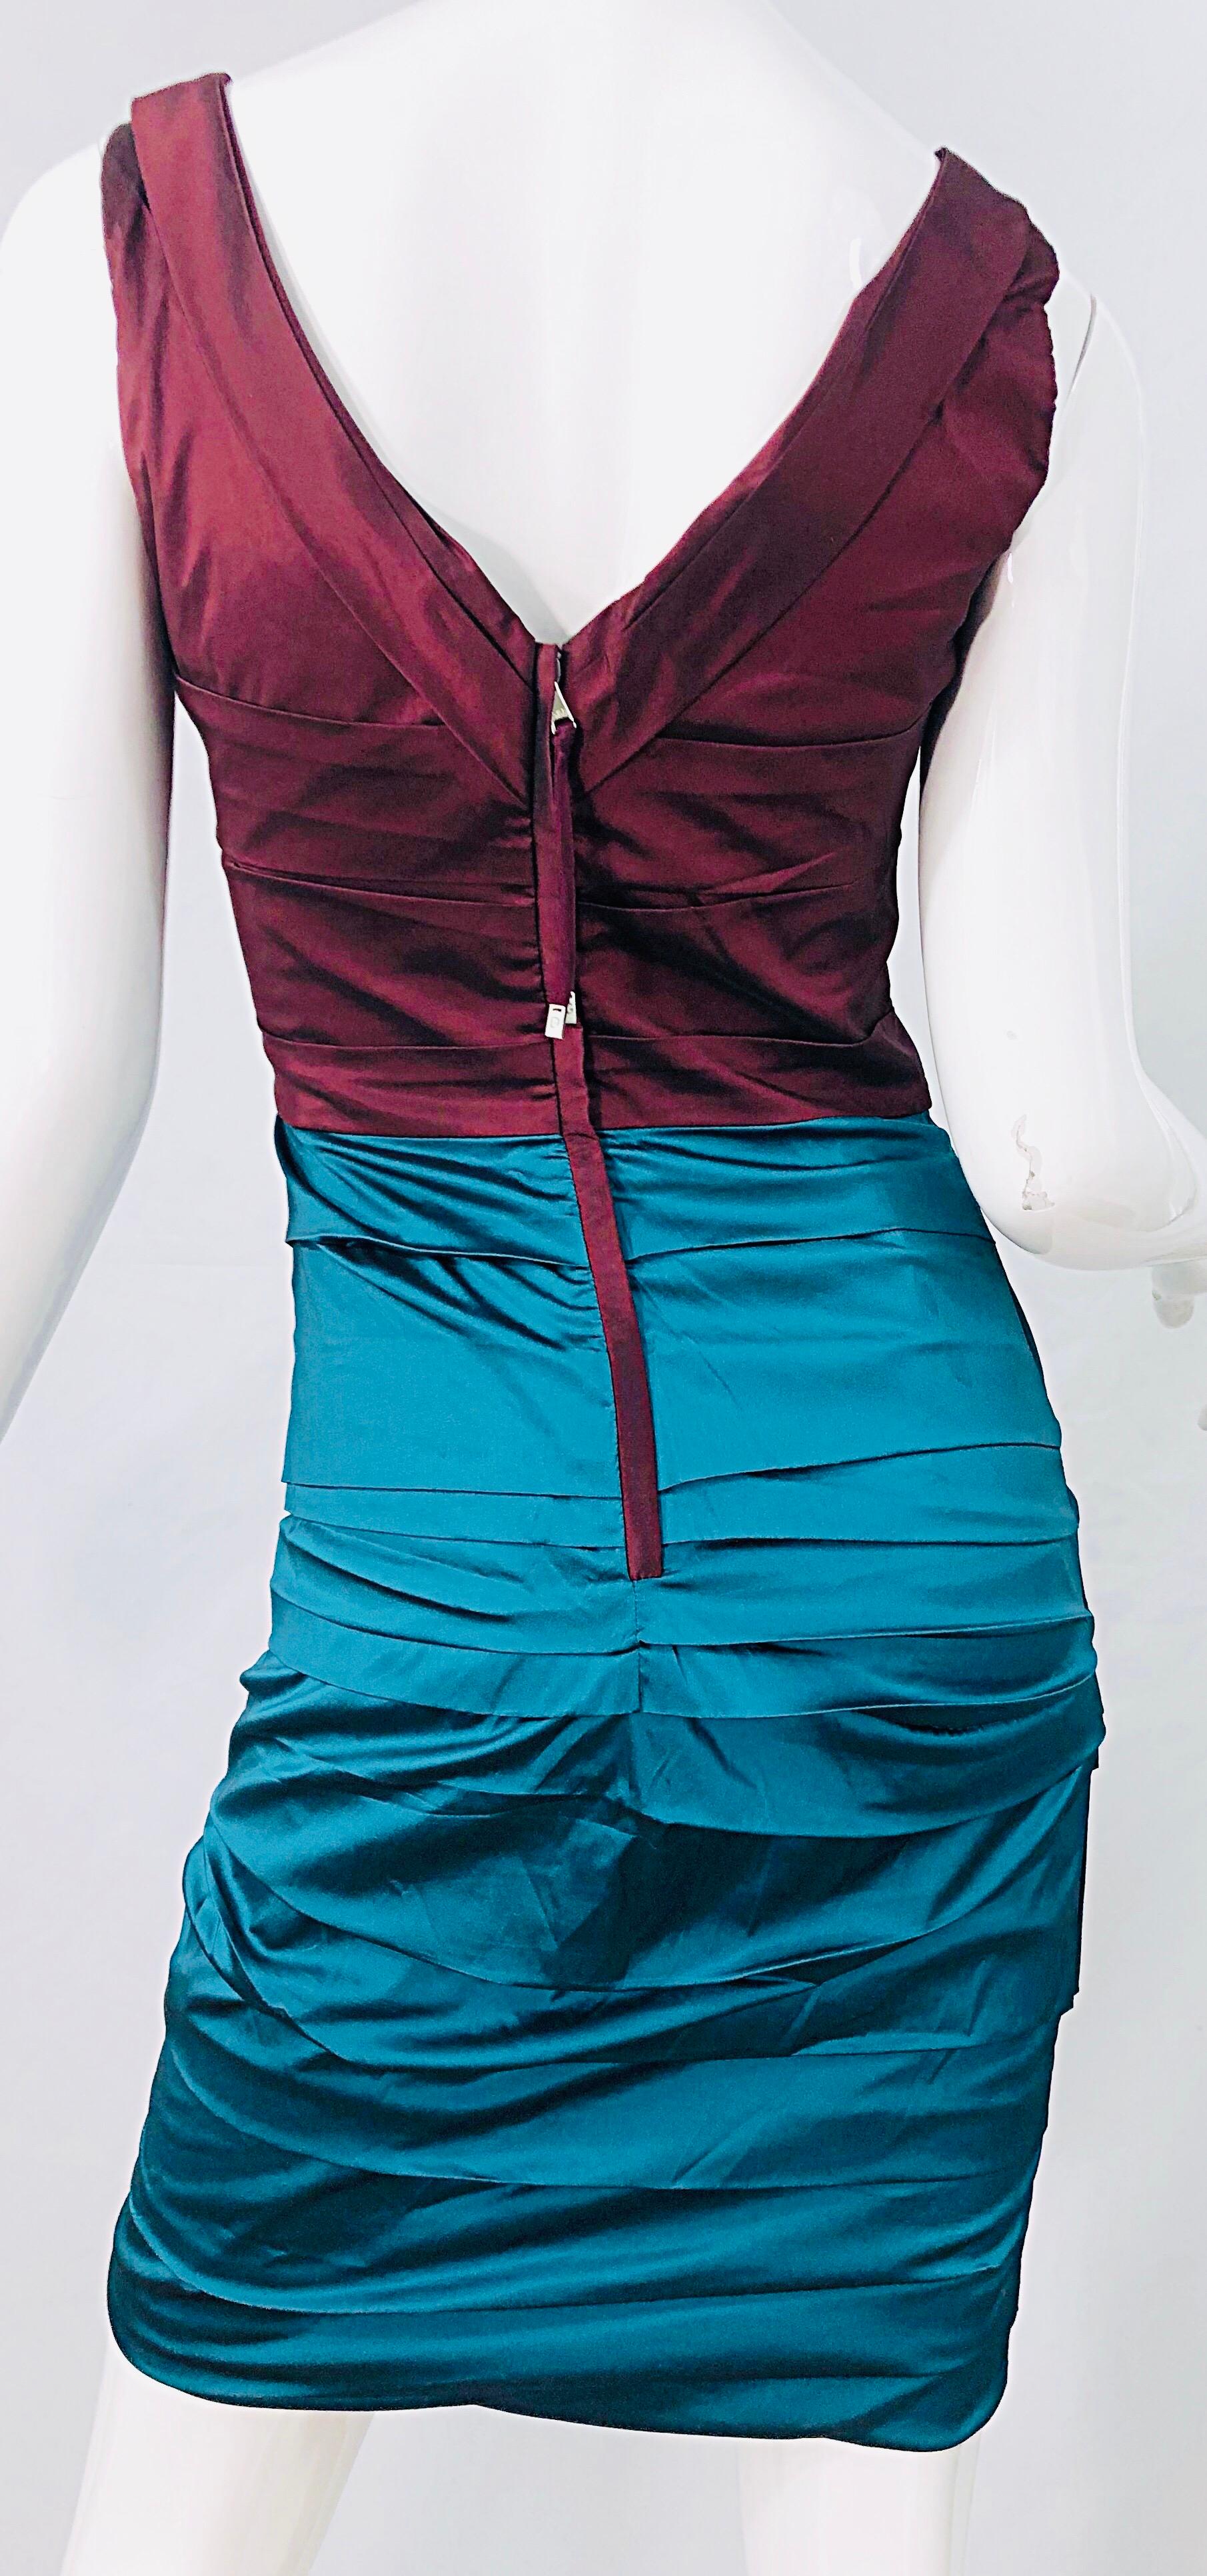 NWT Dolce and Gabbana 1990s Burgundy Turquoise Blue Colorblock Vintage Dress 3